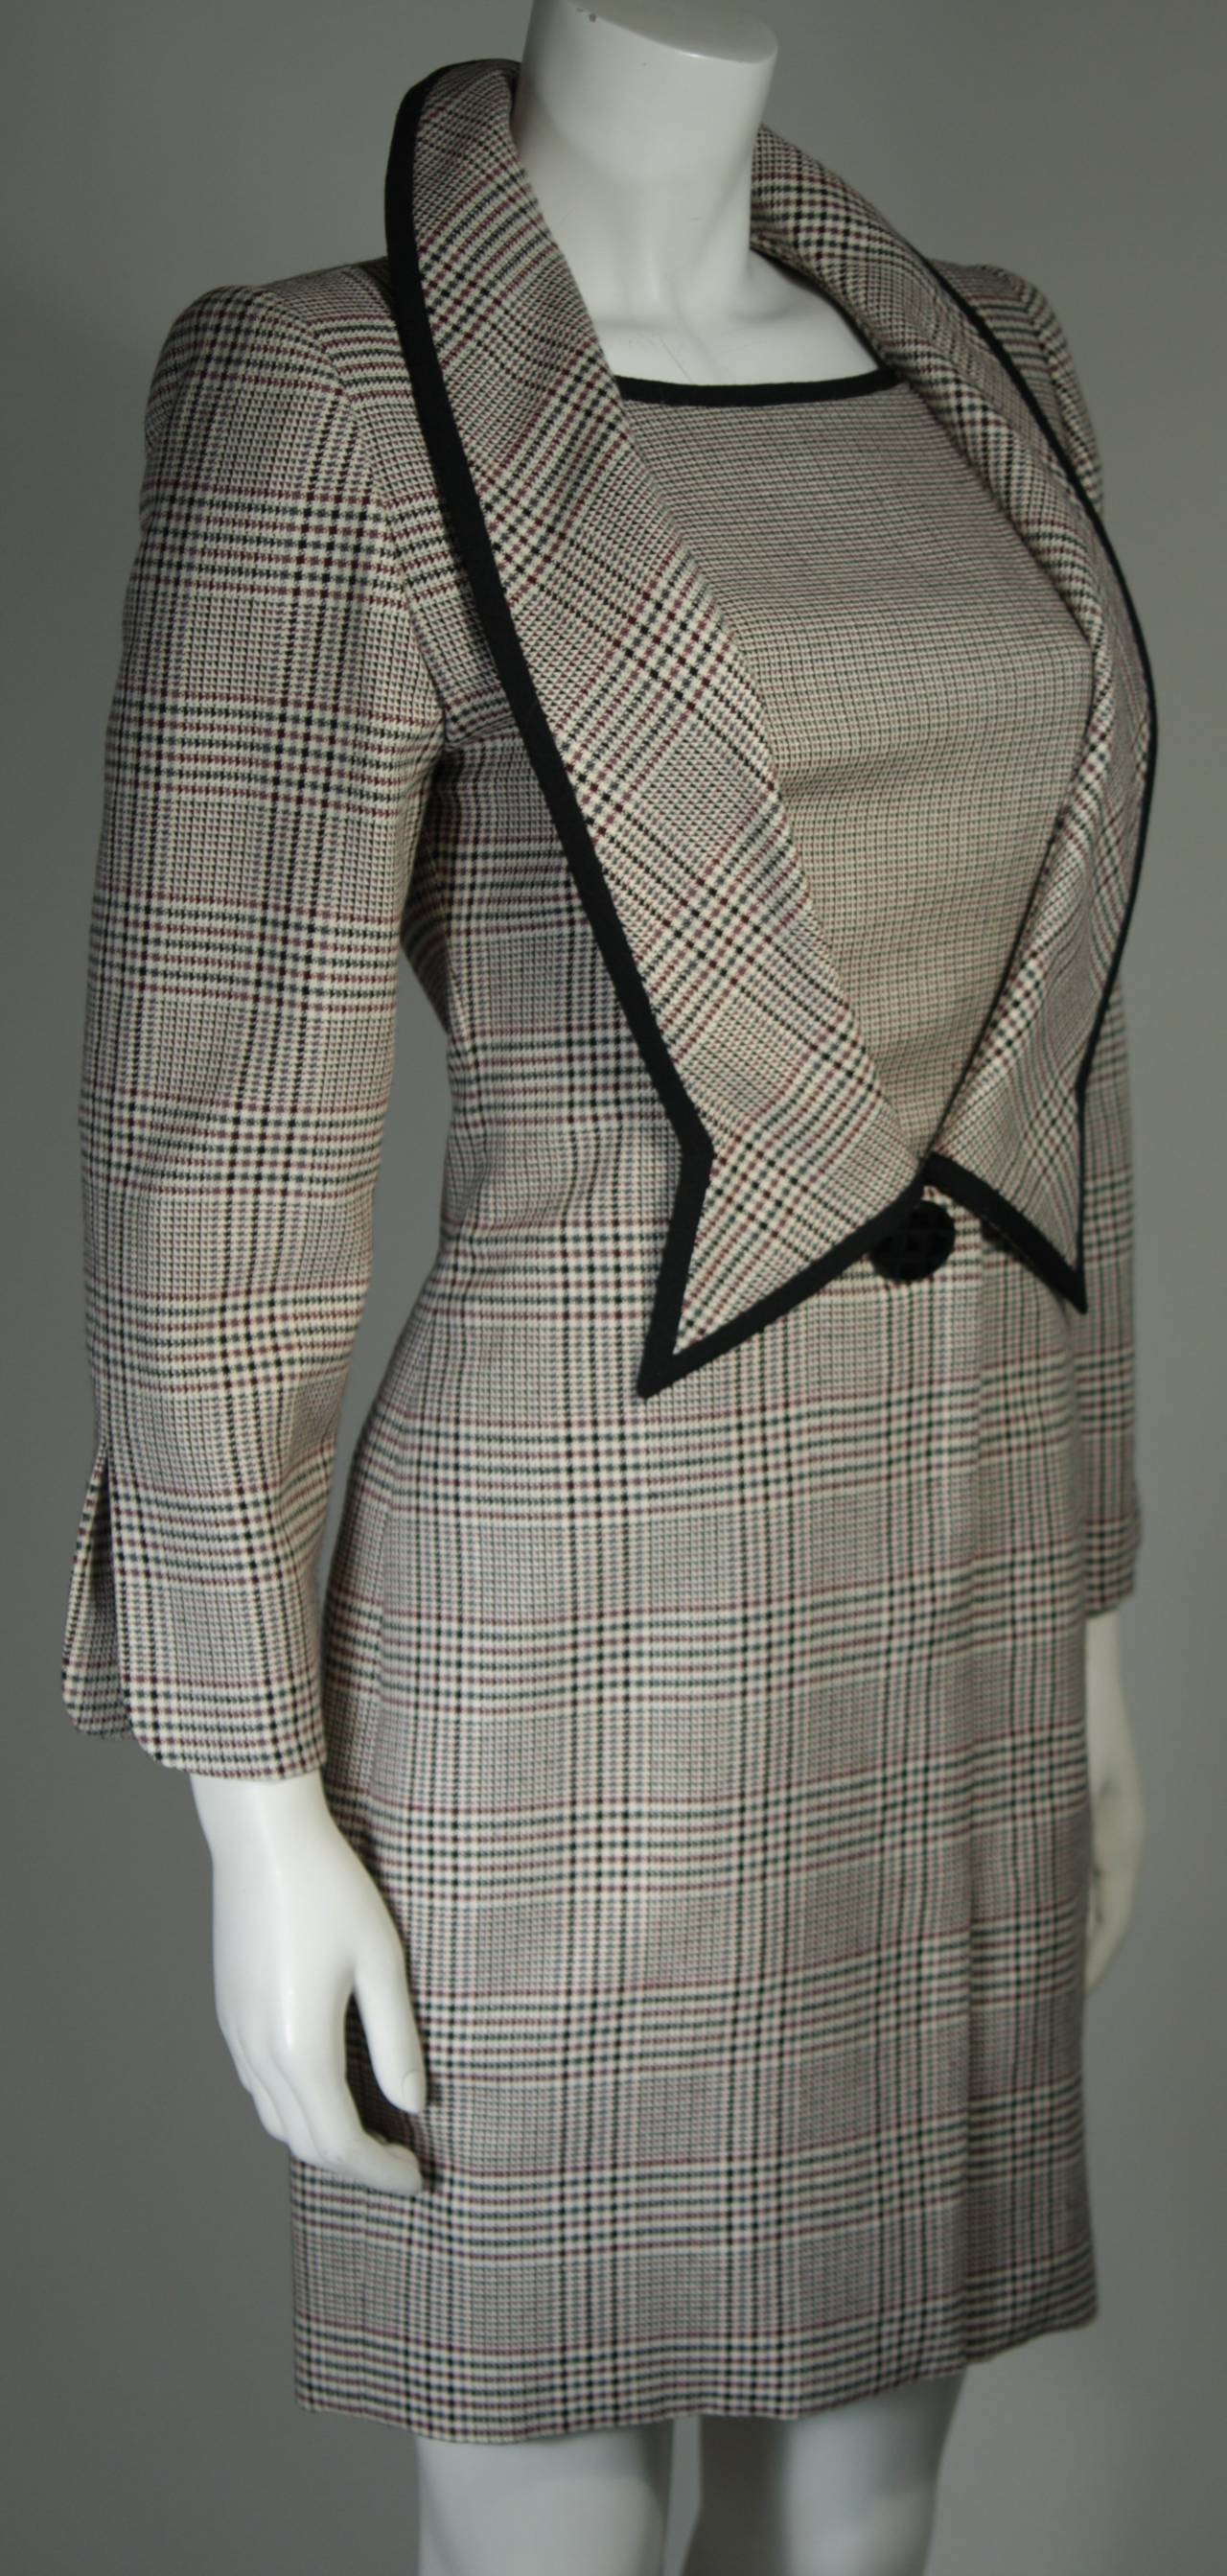 Women's or Men's Galanos Couture Maroon Houndstooth Dress with Black Trim Size 2 4